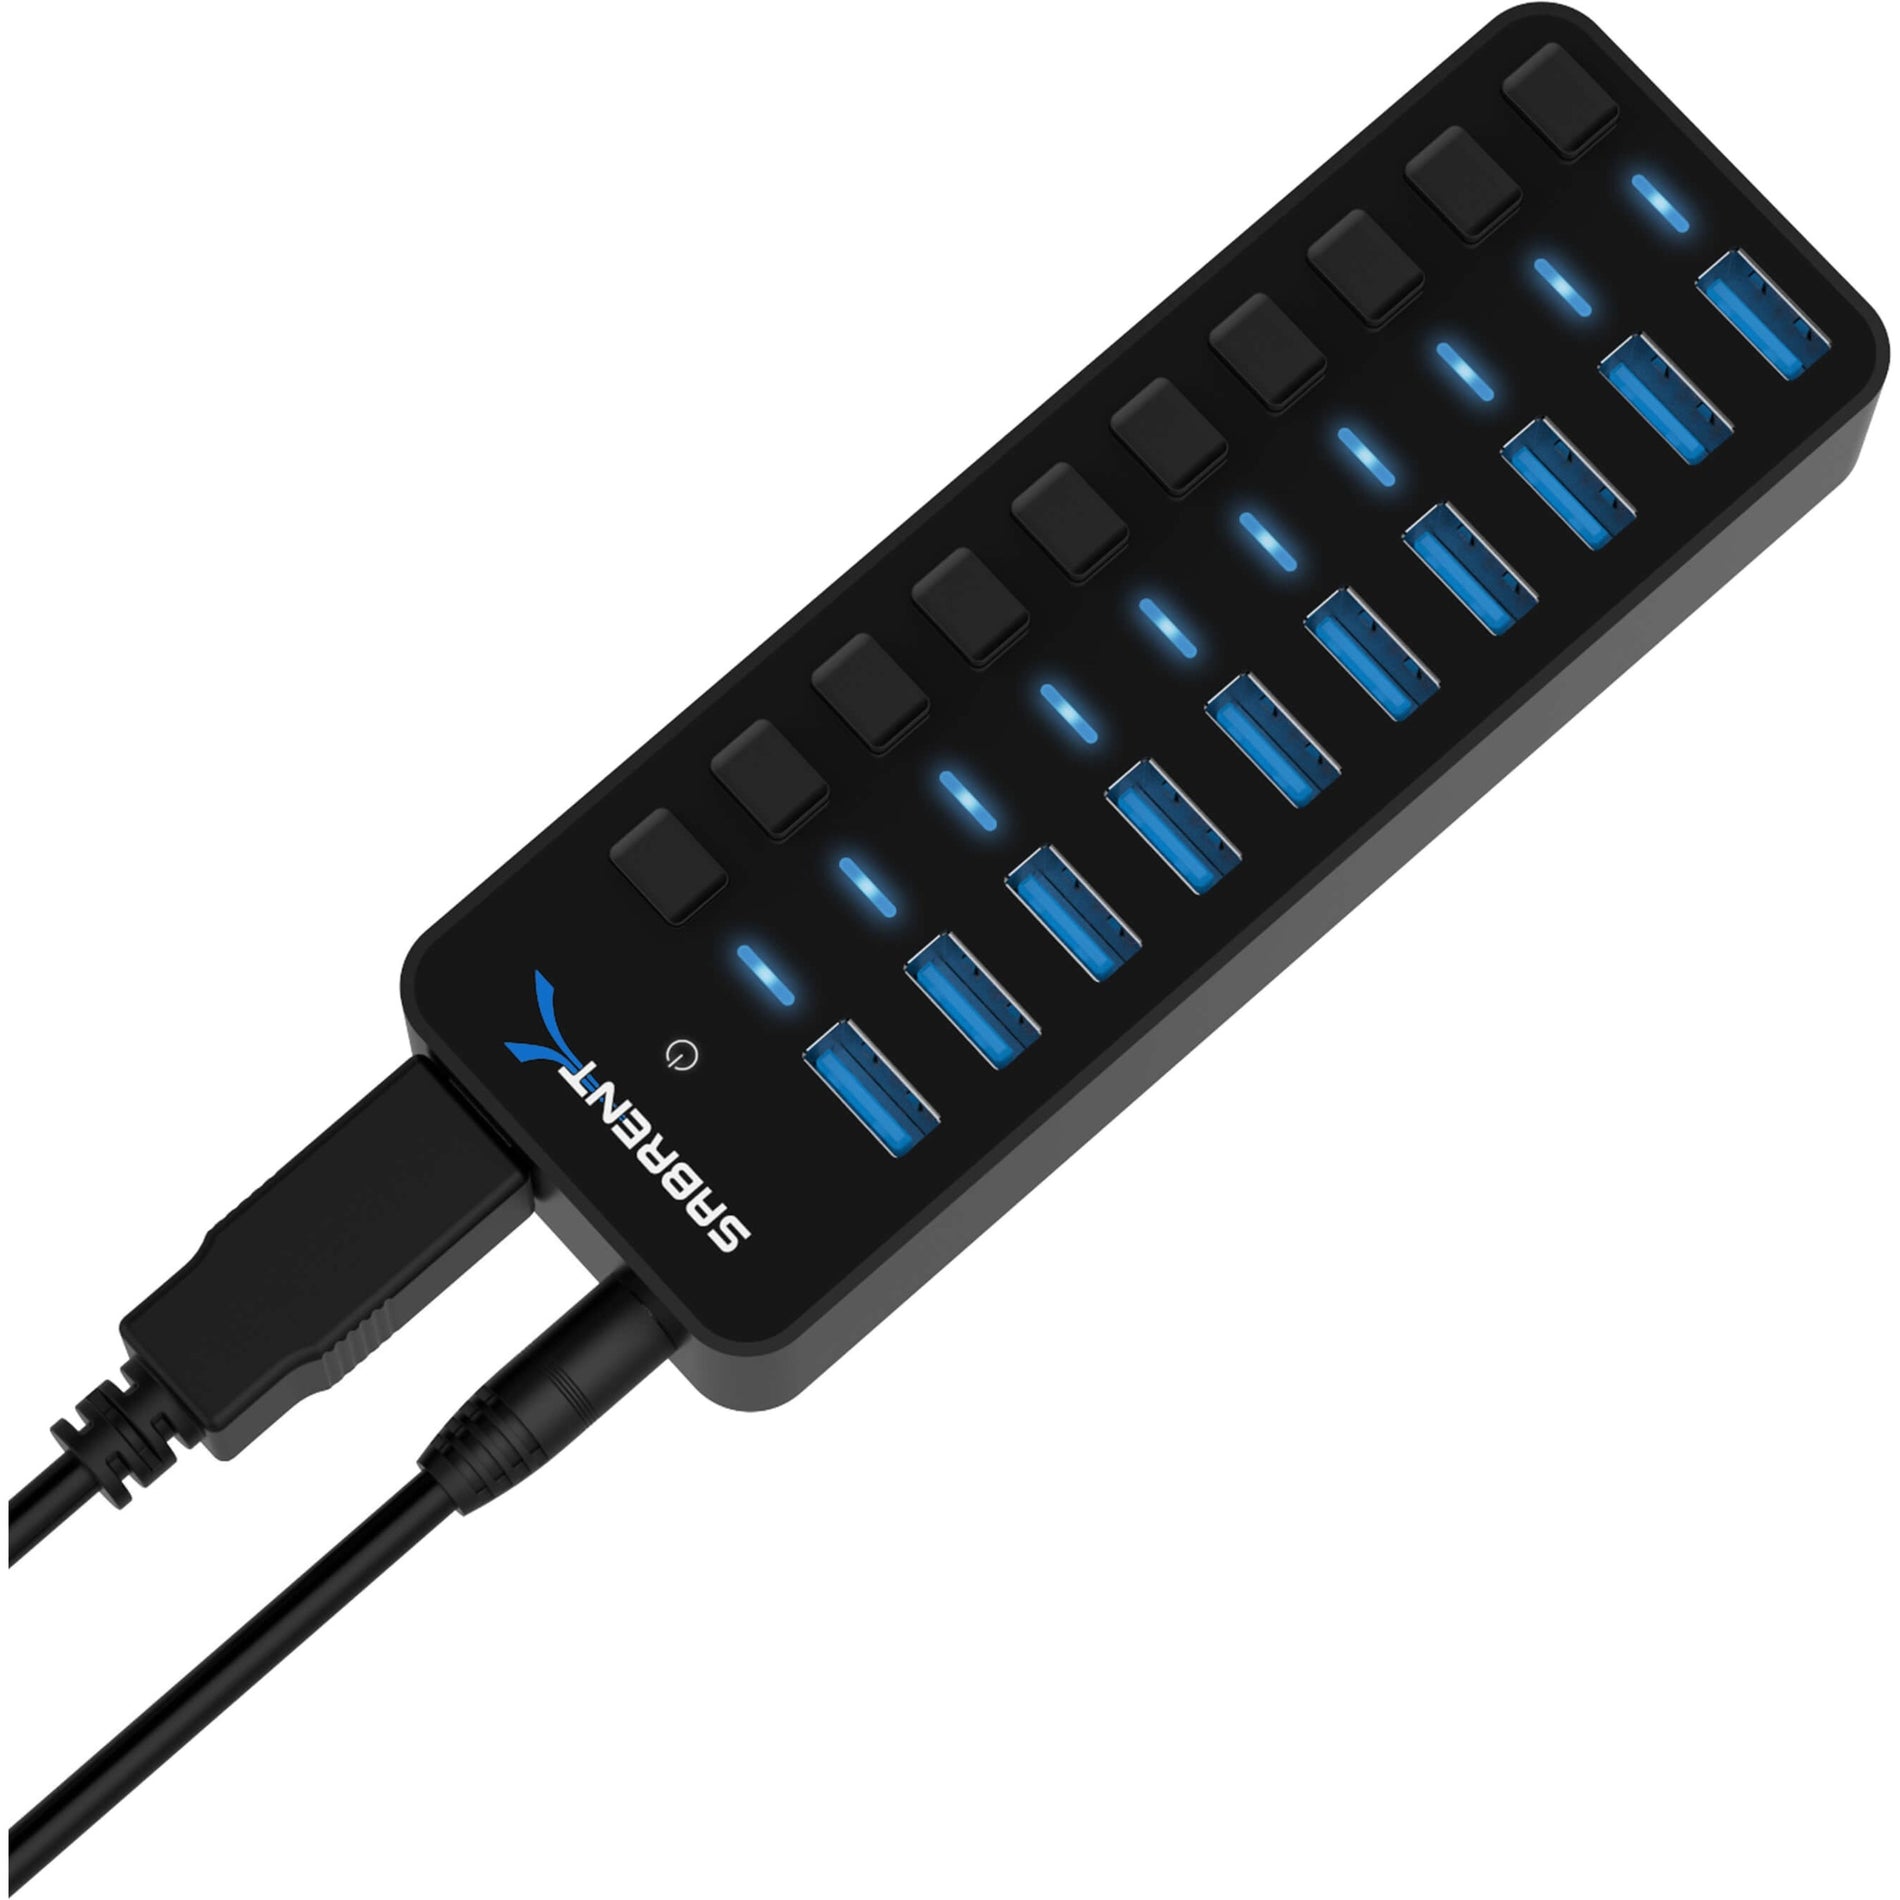 Sabrent HB-BU10 10-Port USB 3.0 Hub with Individual Power Switches and LEDs, Expand Your USB Connectivity